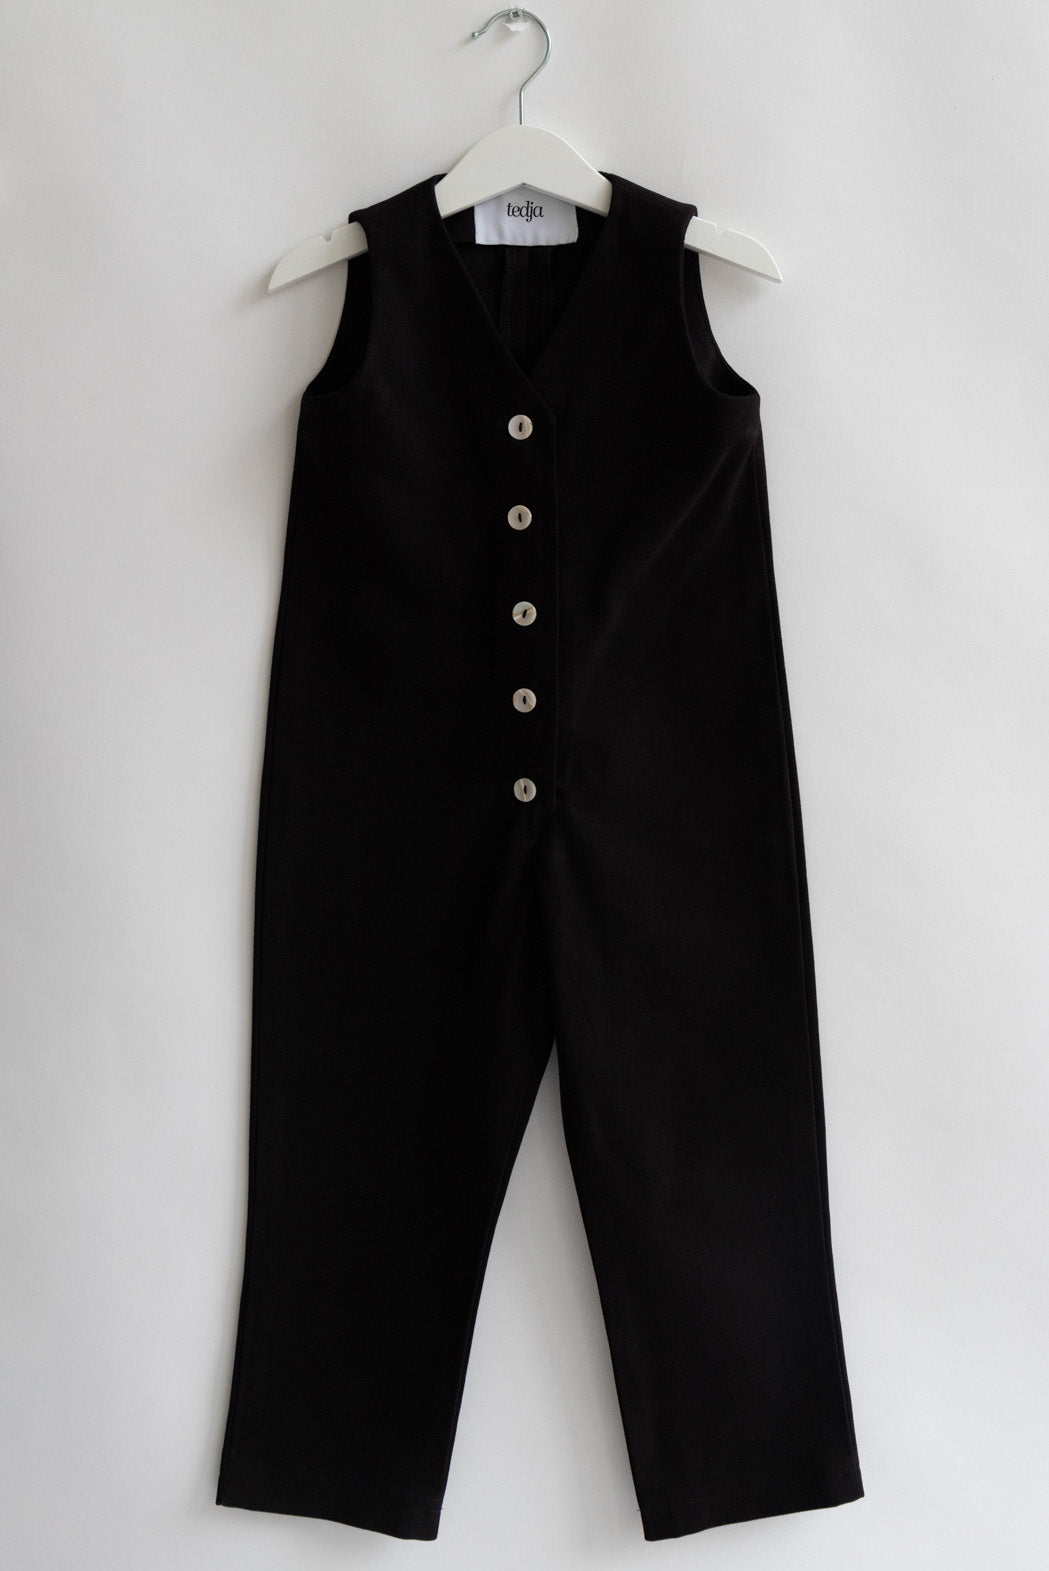 Black color Kids Mini Jumpsuit overall workwear cotton canvas with pockets 5 buttons v-neck OEKO-TEX sustainable clothes handmade